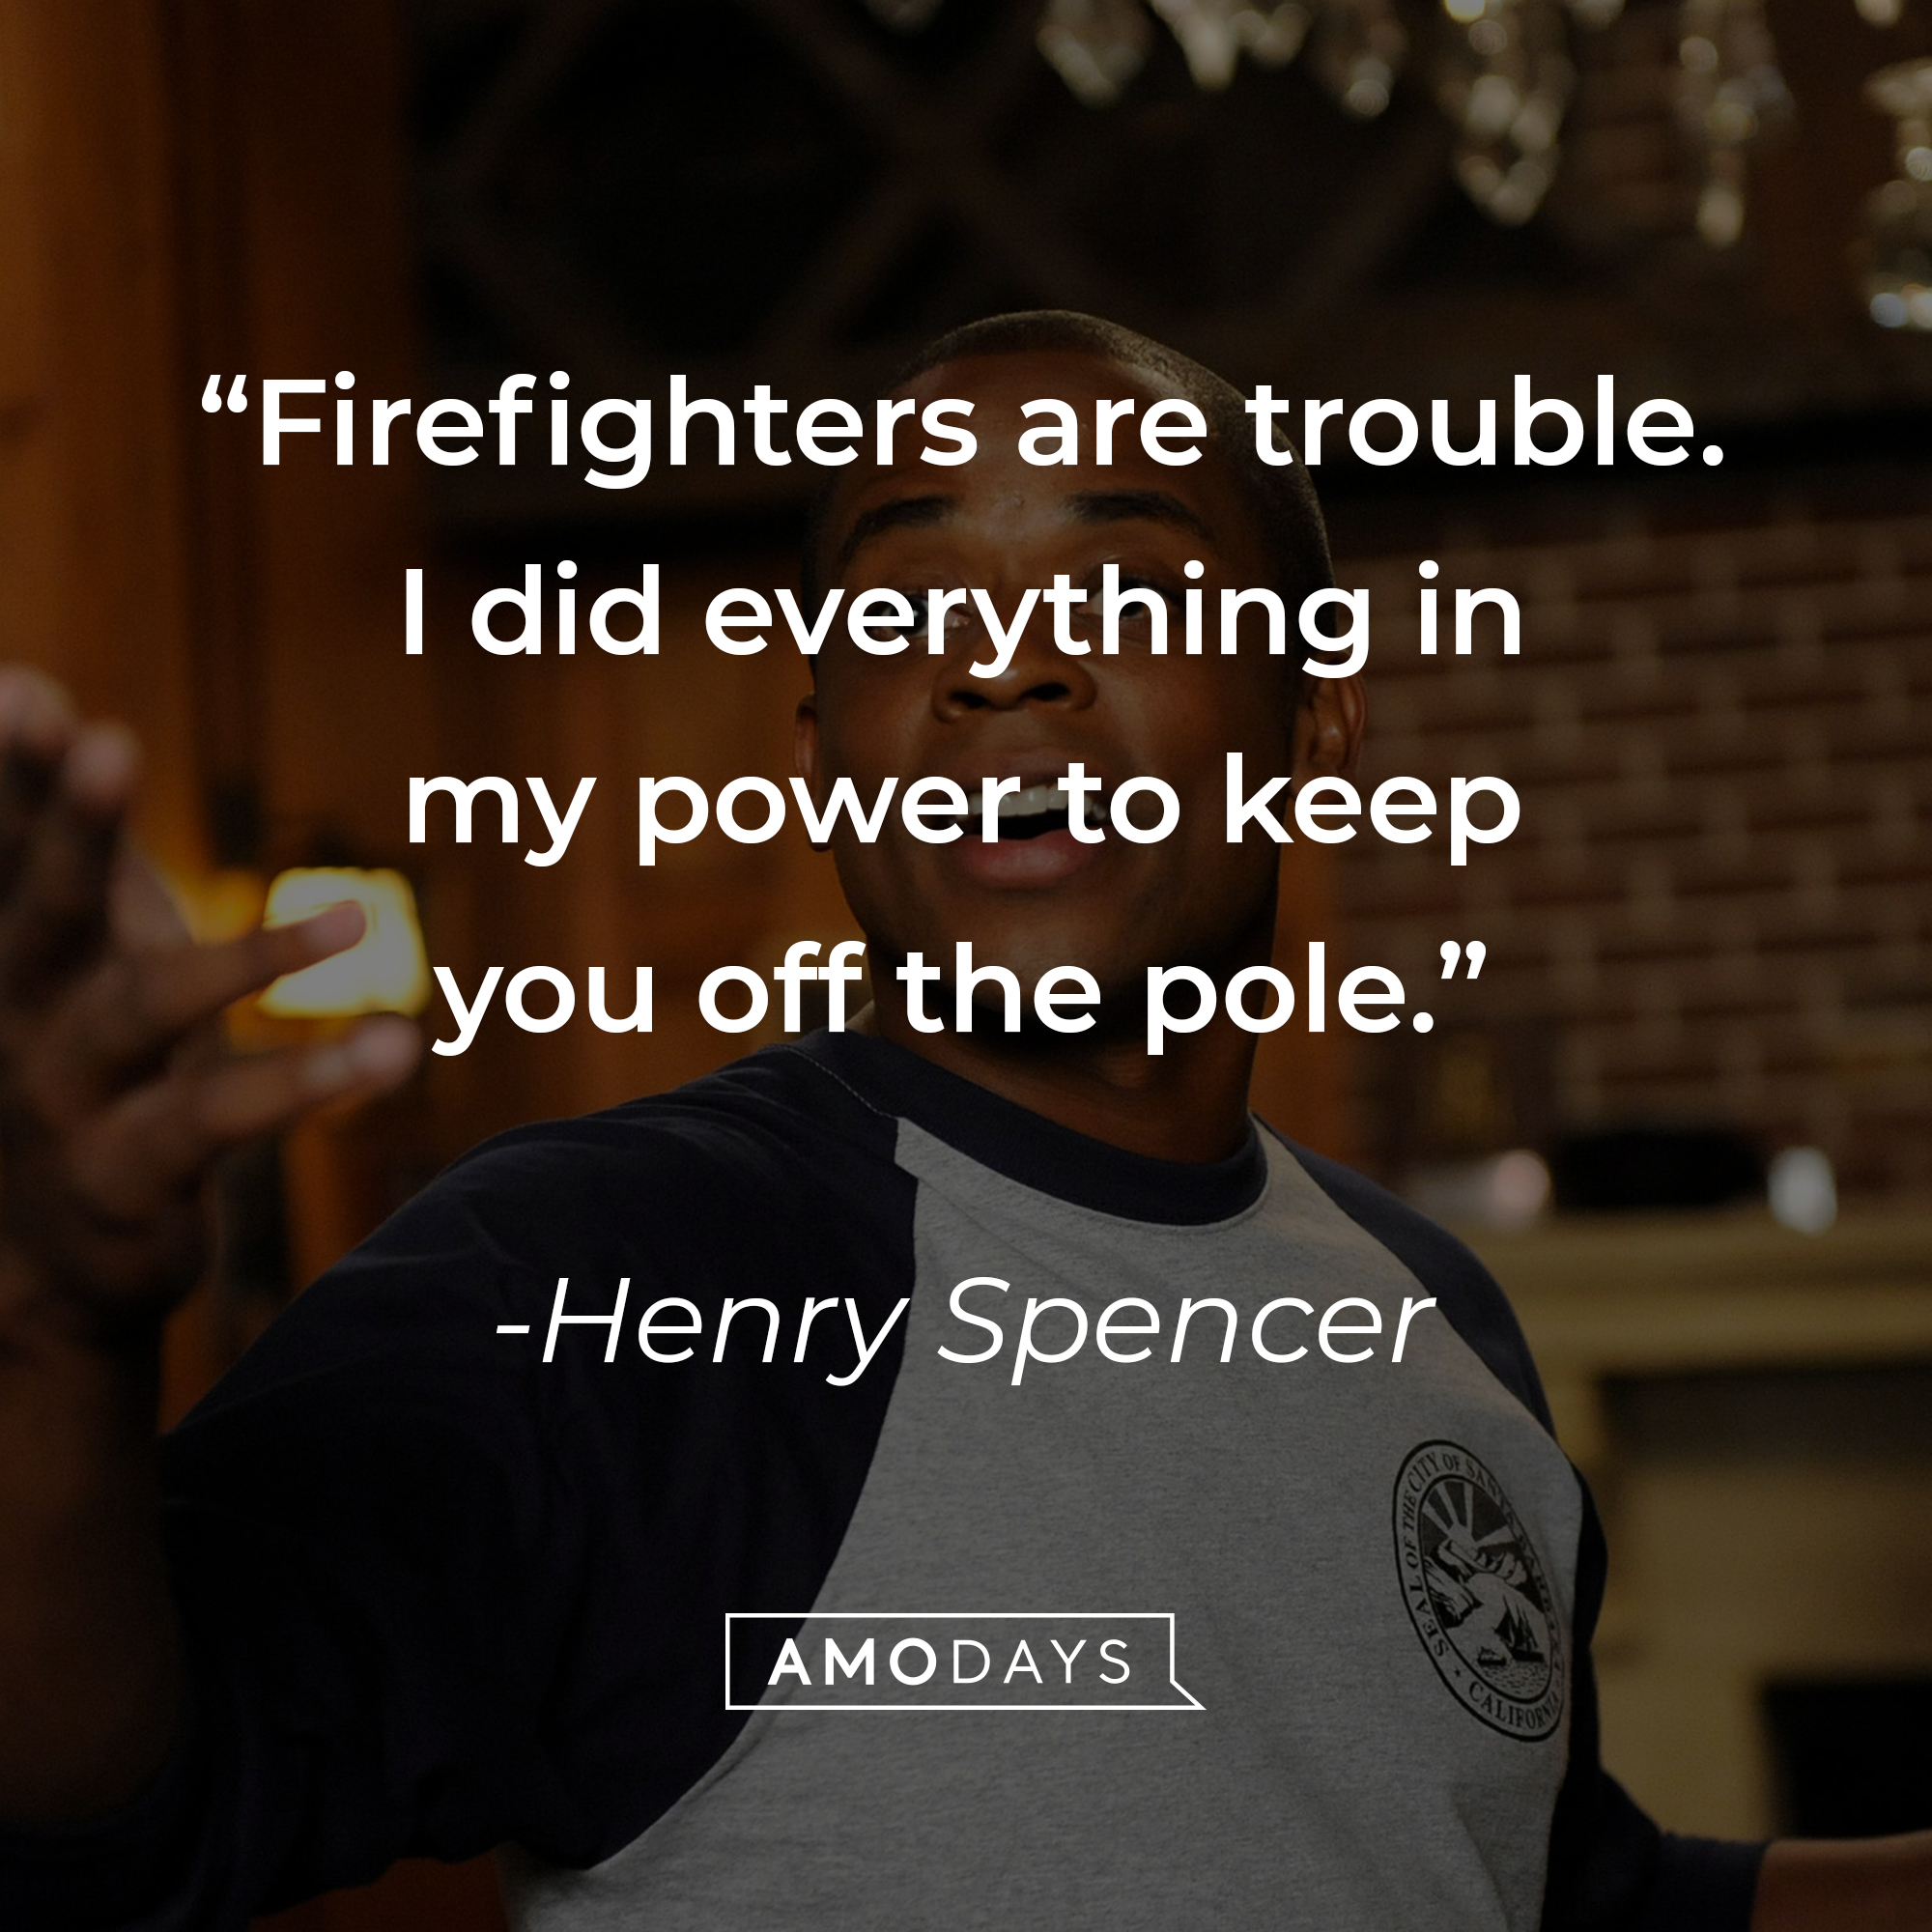 Burton “Gus” Guster, with Henry Spencer’s quote: “Firefighters are trouble. I did everything in my power to keep you off the pole.”  | Source: facebook.com/PsychPeacock